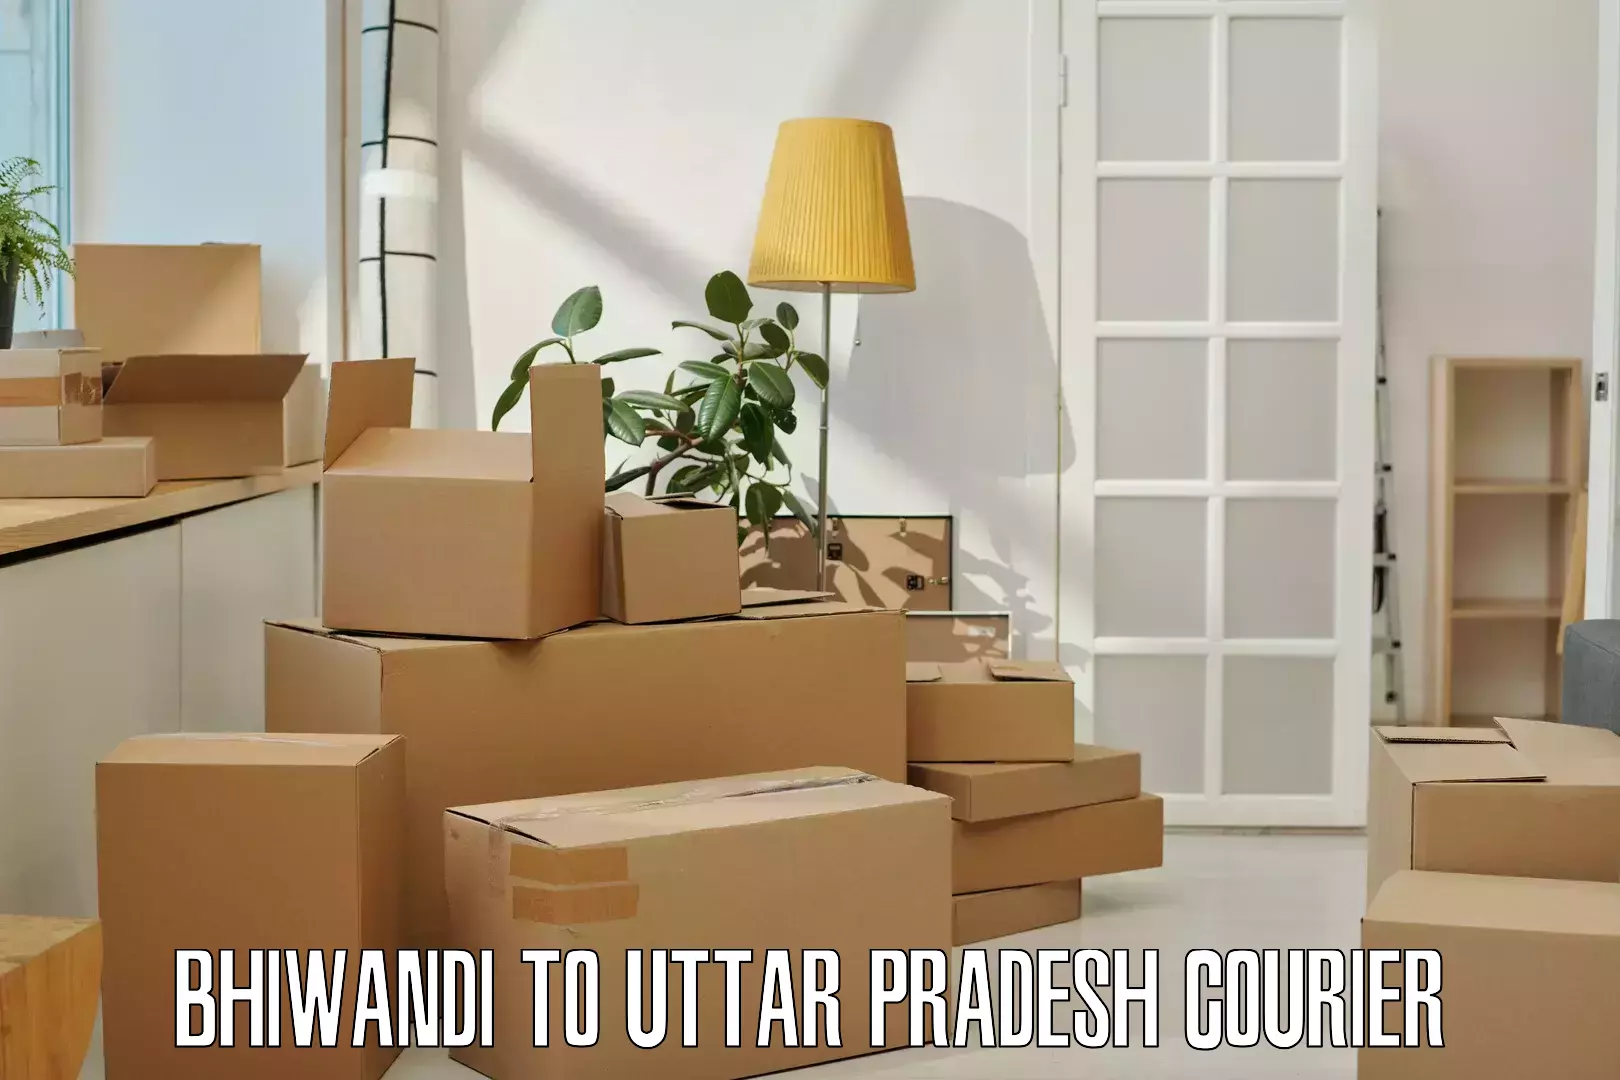 Flexible delivery schedules Bhiwandi to Dataganj